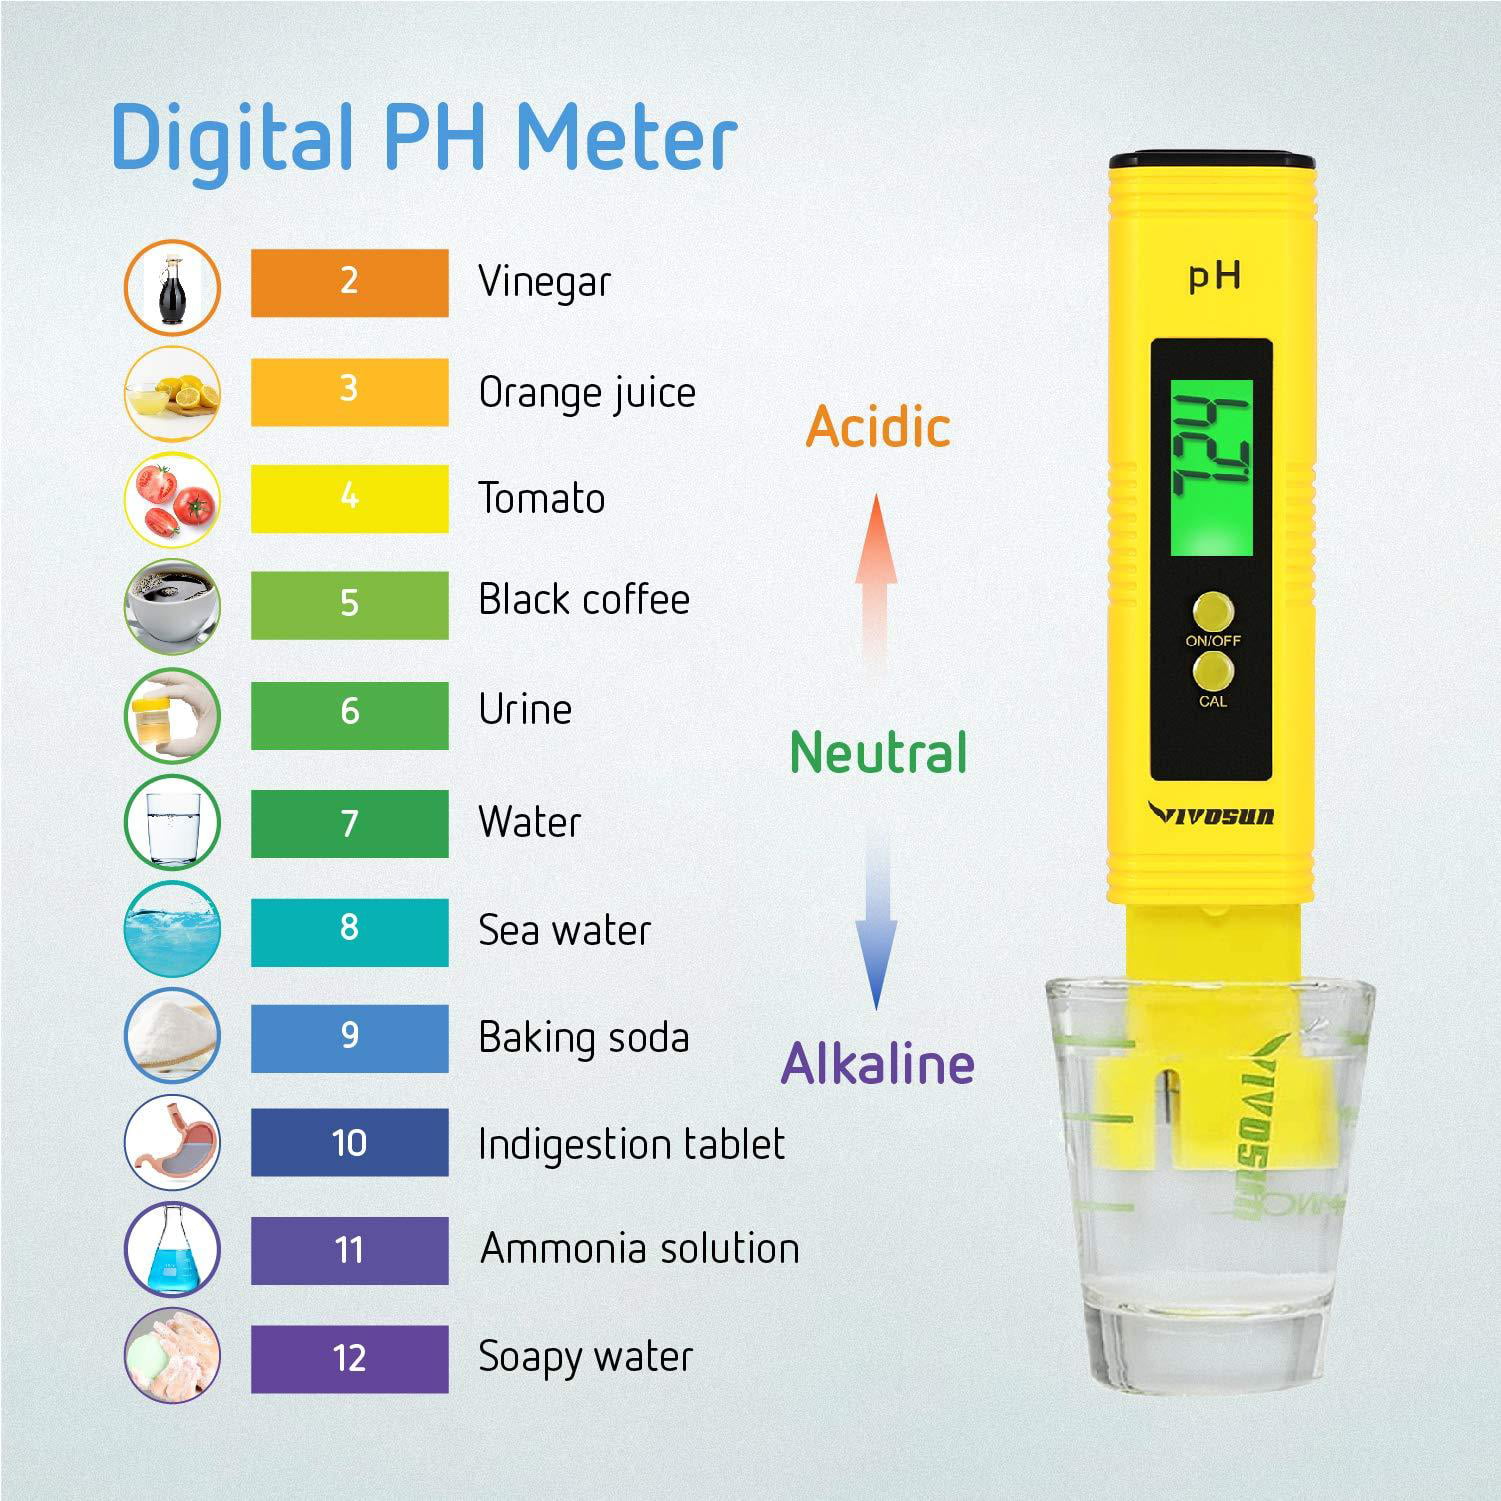 TDS Meter with 0-9999PPM Range and ±2% Accuracy pH Tester with 0-14 pH Rang and 0.01 Accuracy for Hydroponics,Aquariums,RO System etc by HYCT 3-in-1 PPM Meter and pH Meter Combo,TDS-EC-Temp